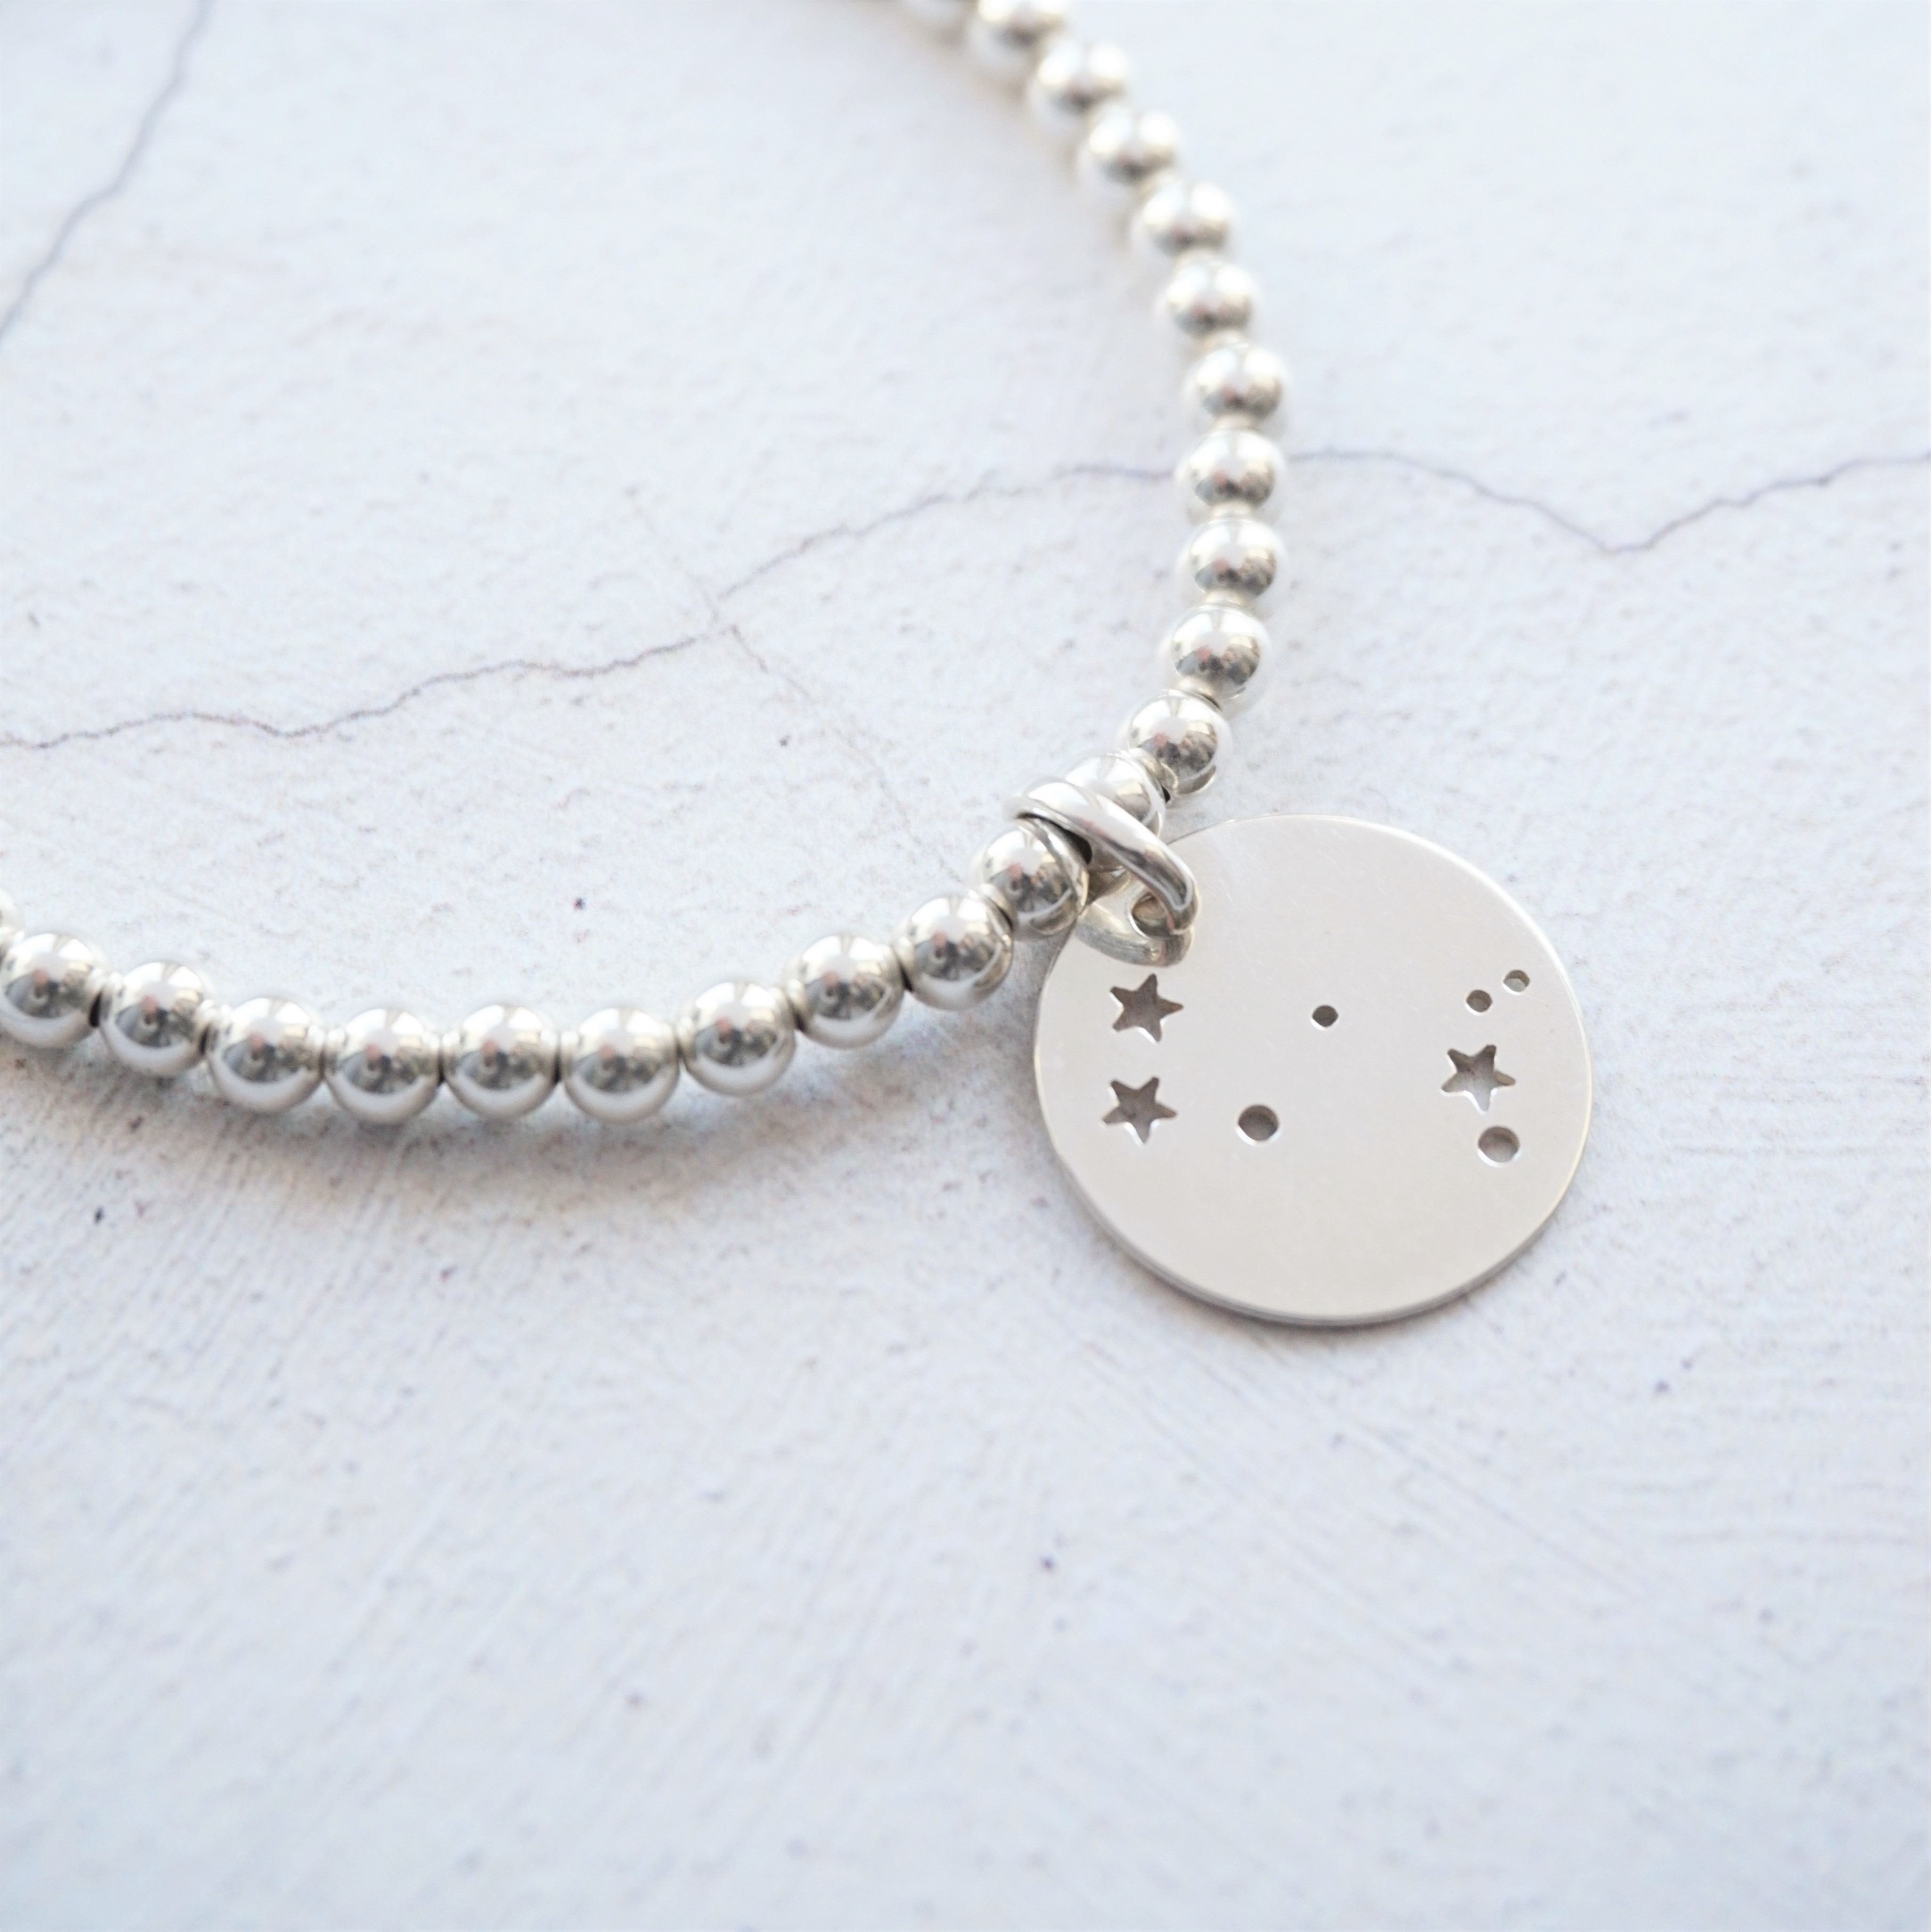 sterling silver bracelet with constellation charm